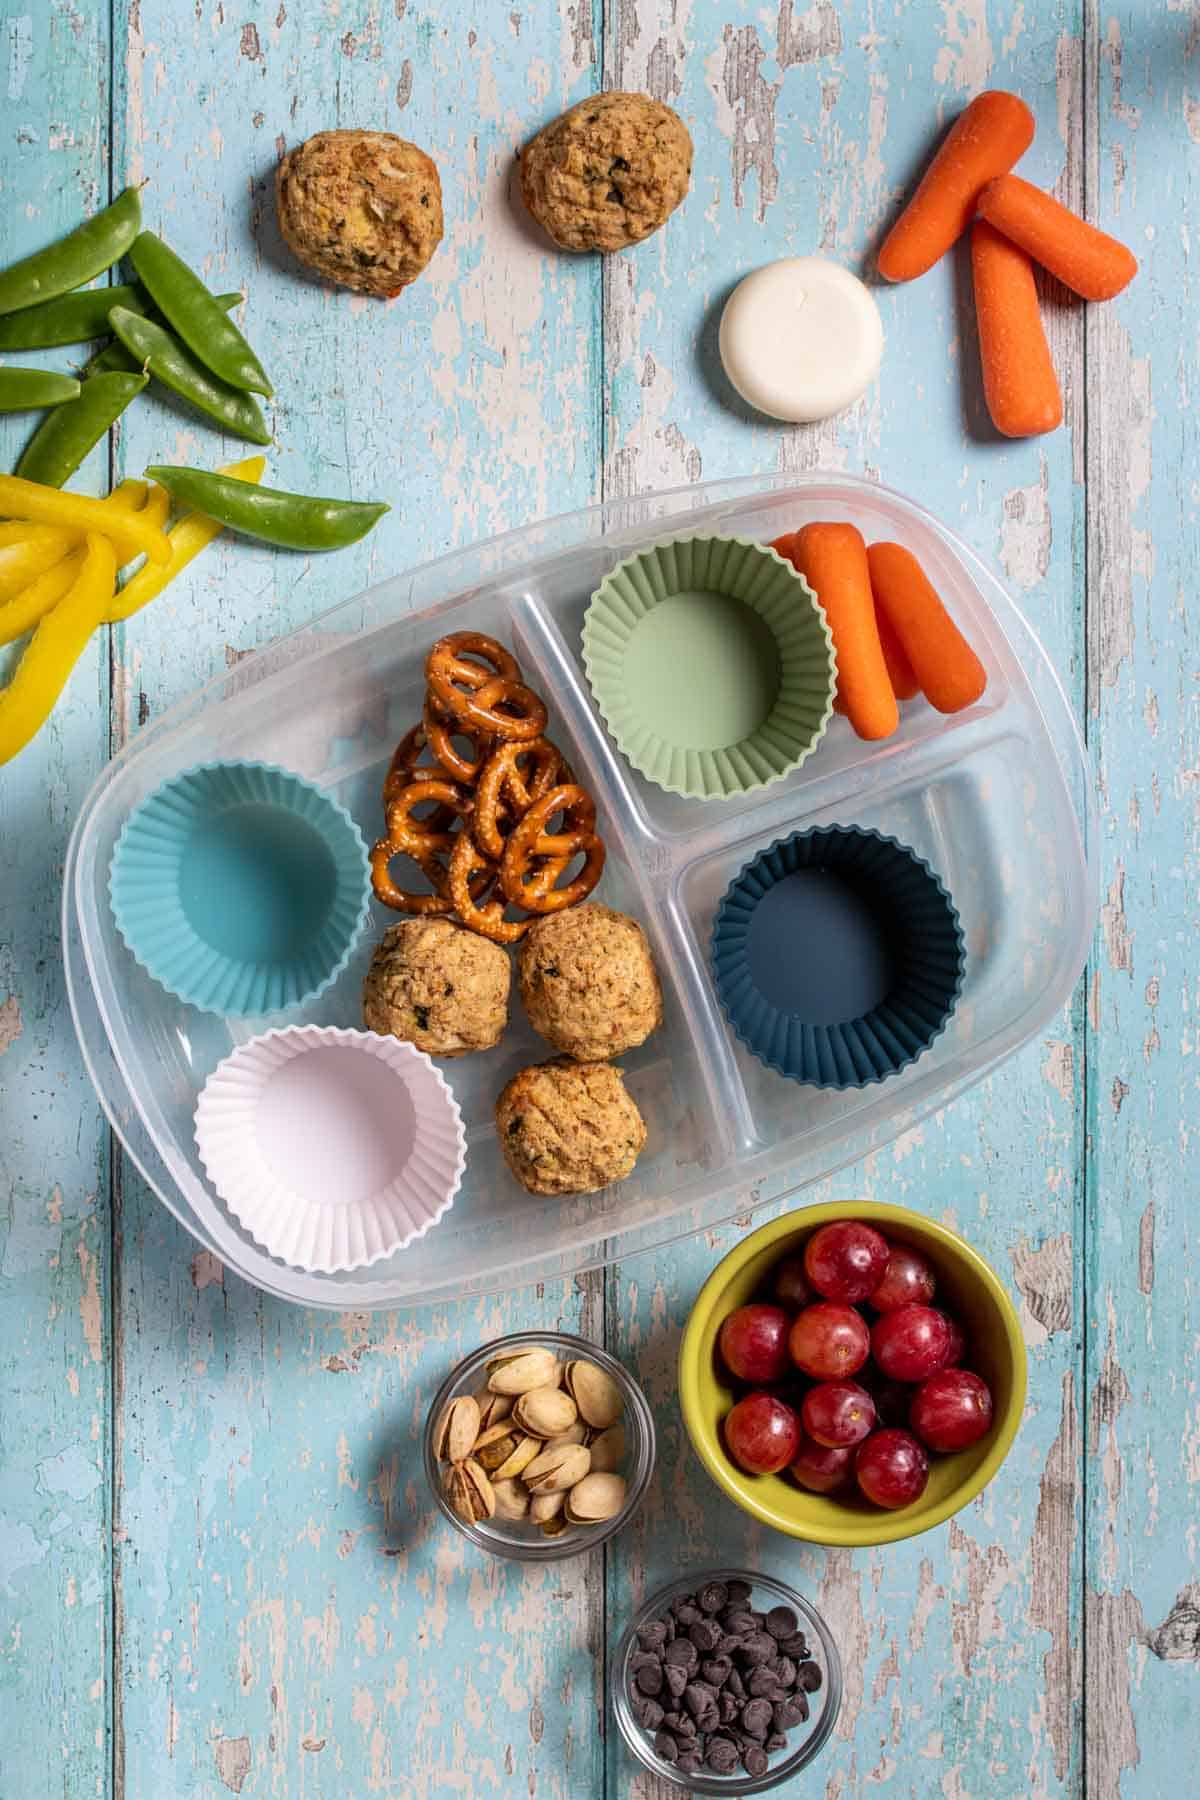 Top view of a container with sections with carrots, pretzels and protein balls with other fruit, veggies and snacks around it.